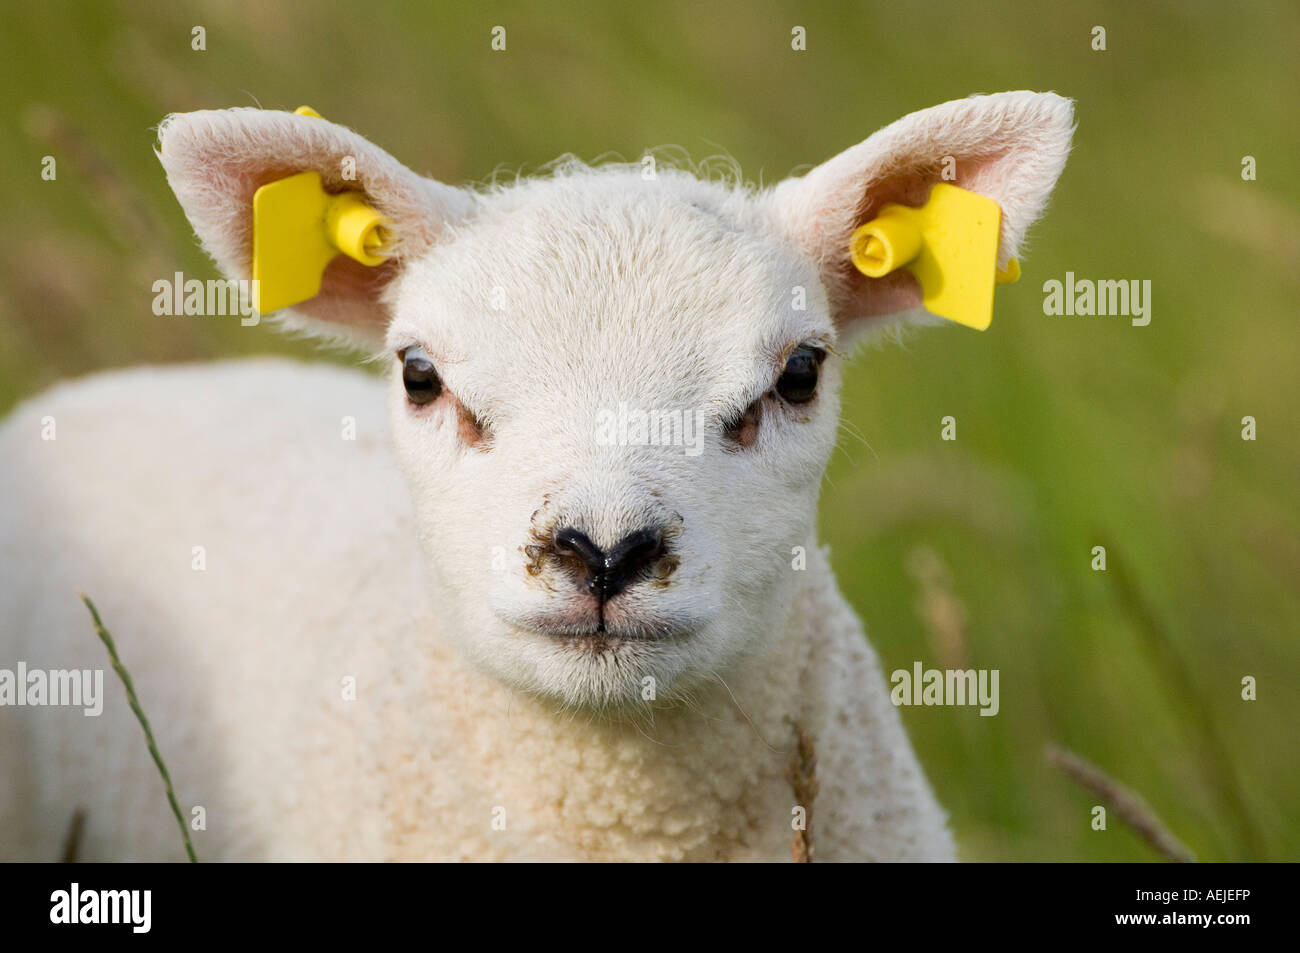 Young Sheep Stock Photo